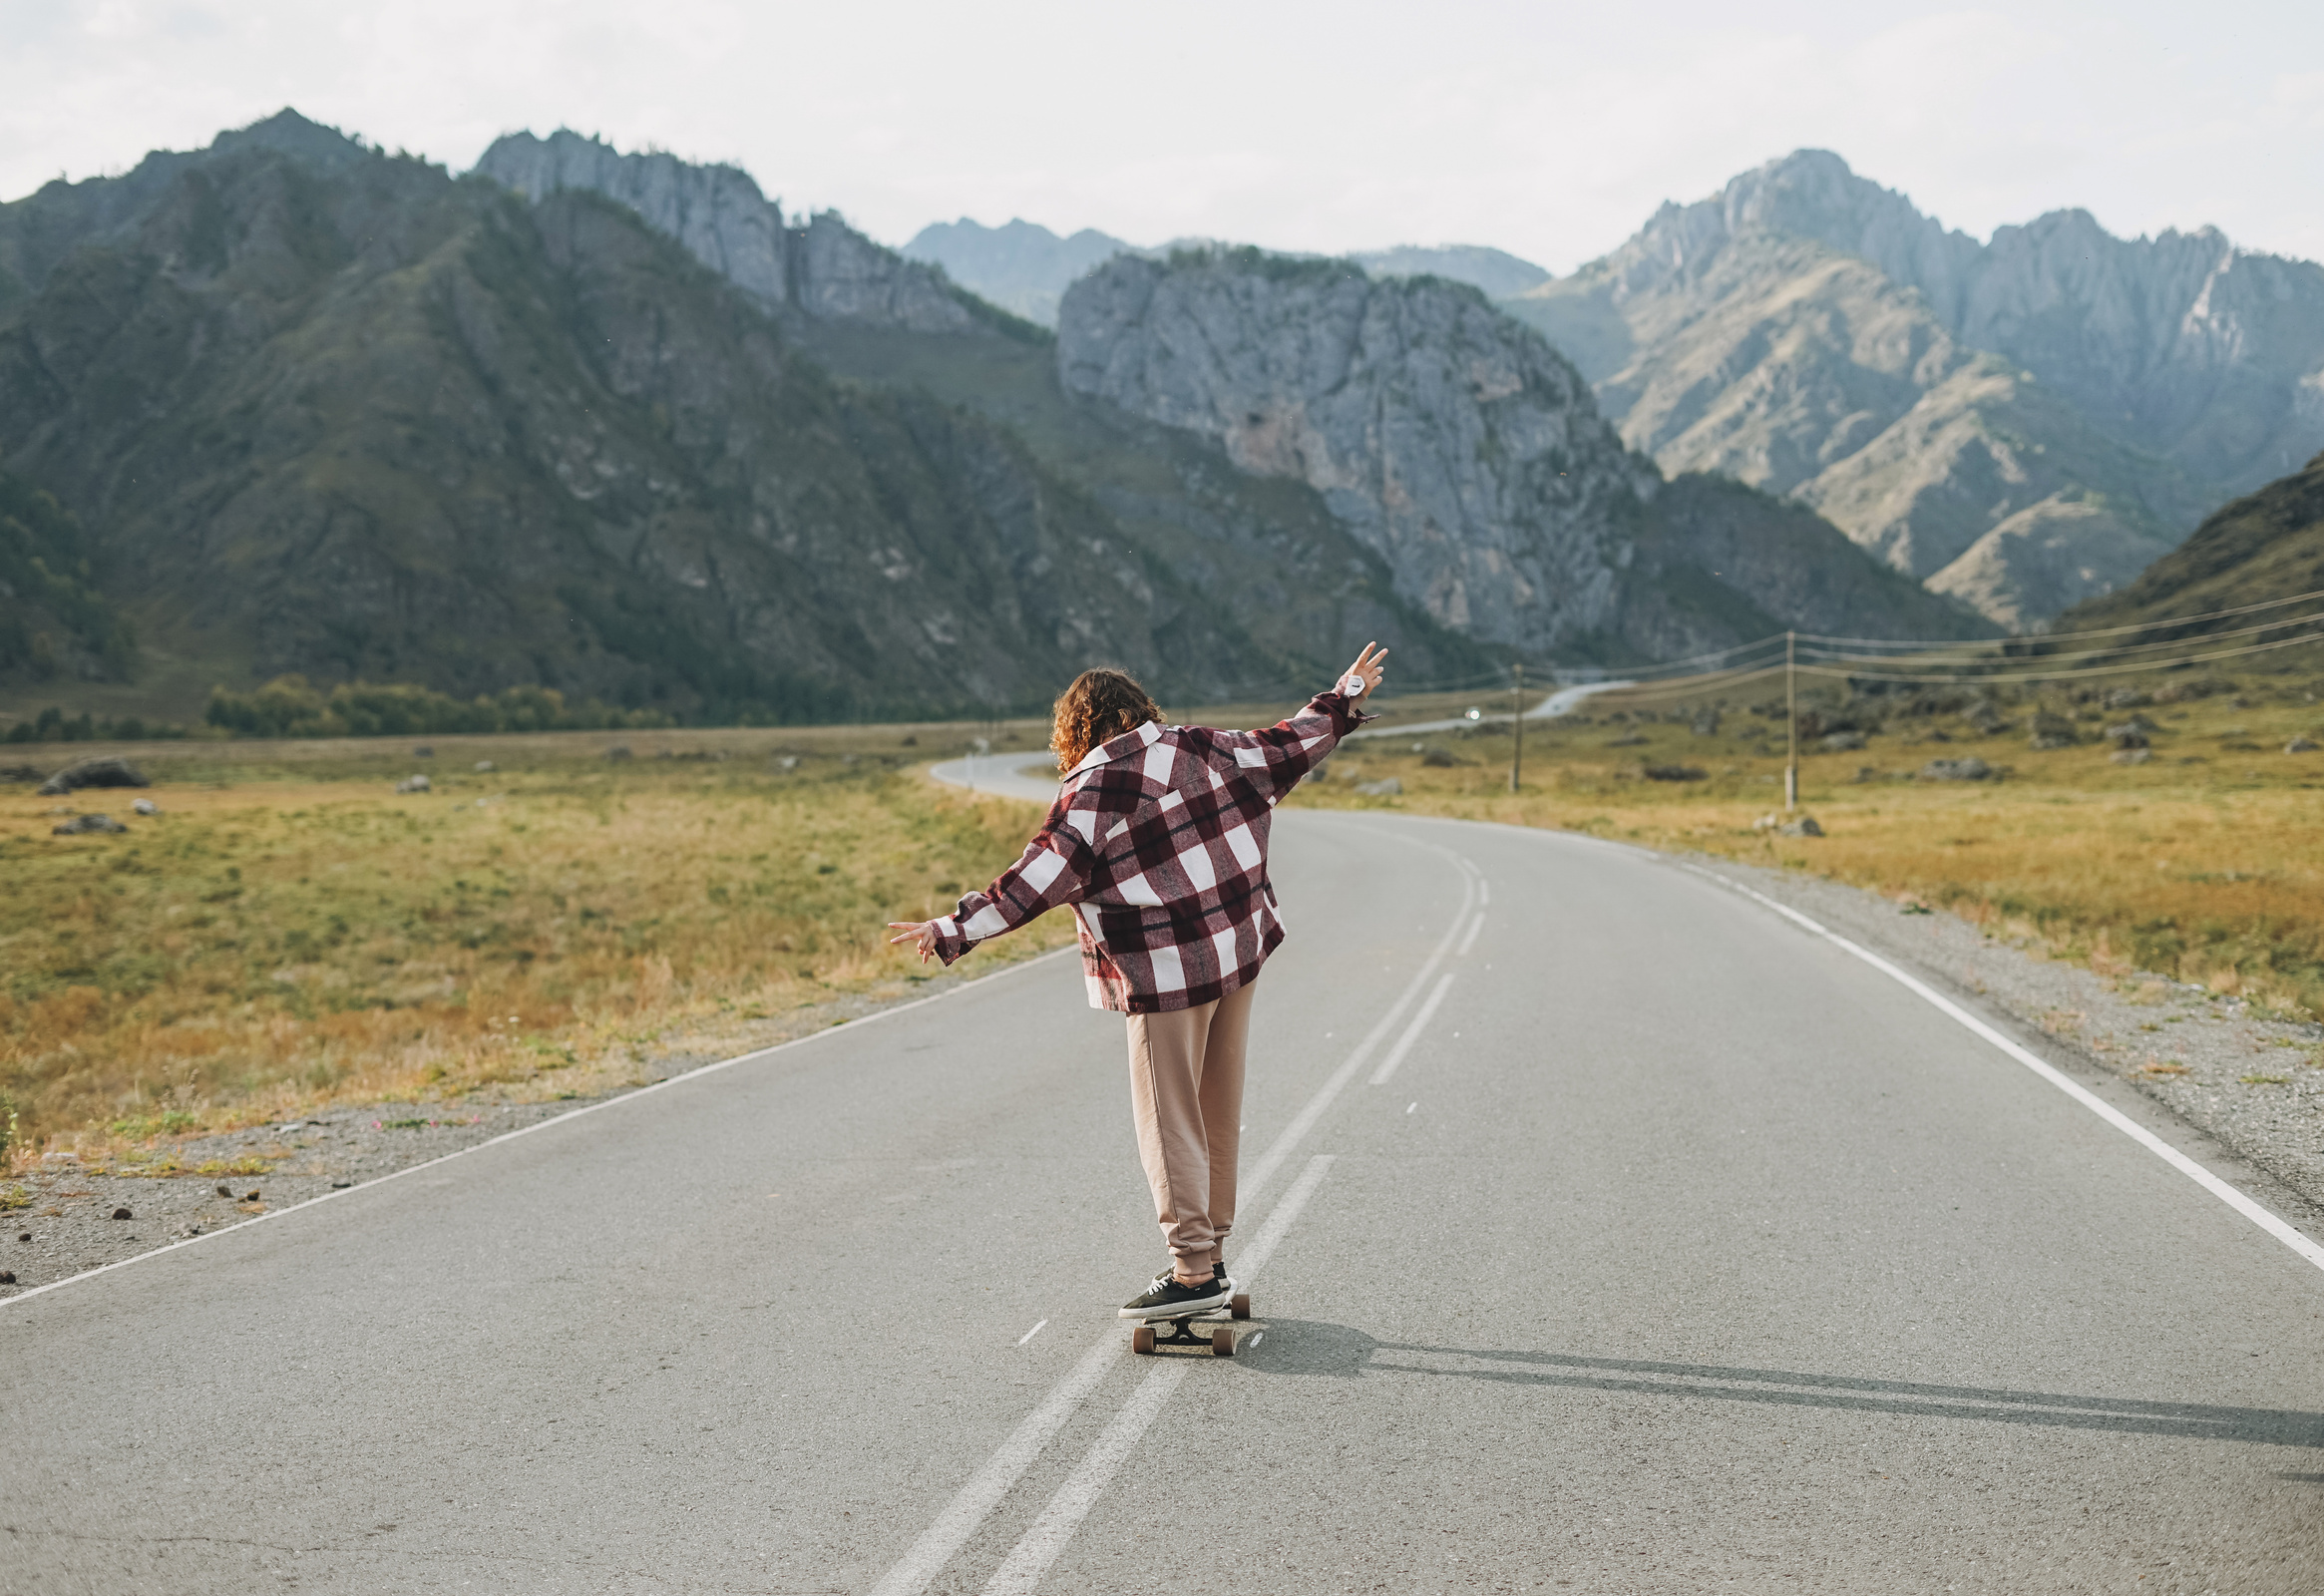 Person on Skateboard on Road against Beautiful Mountain Landscape